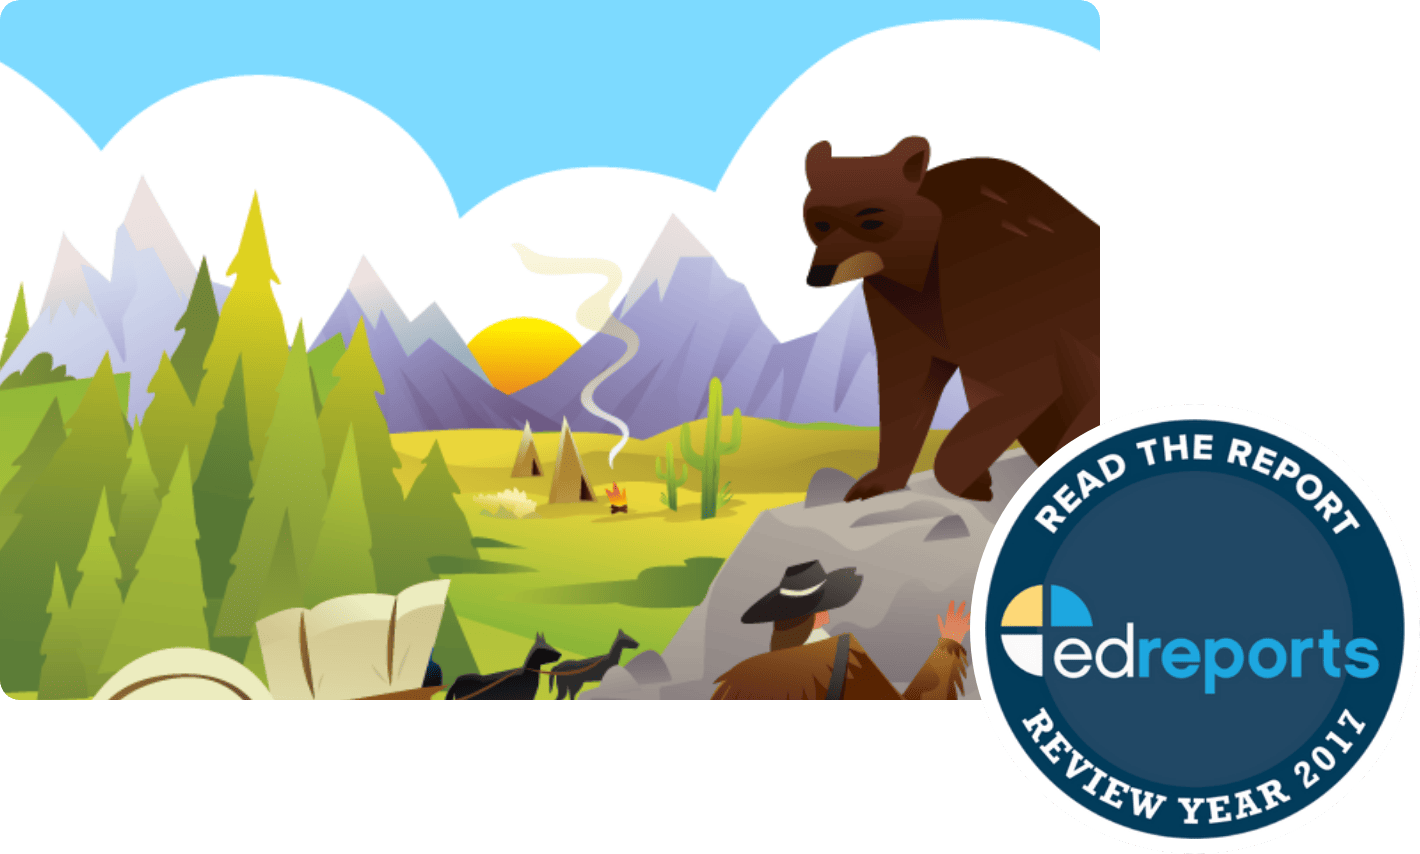 Illustration of a bear on a rock overlooking a mountain landscape with a badge overlay reading 